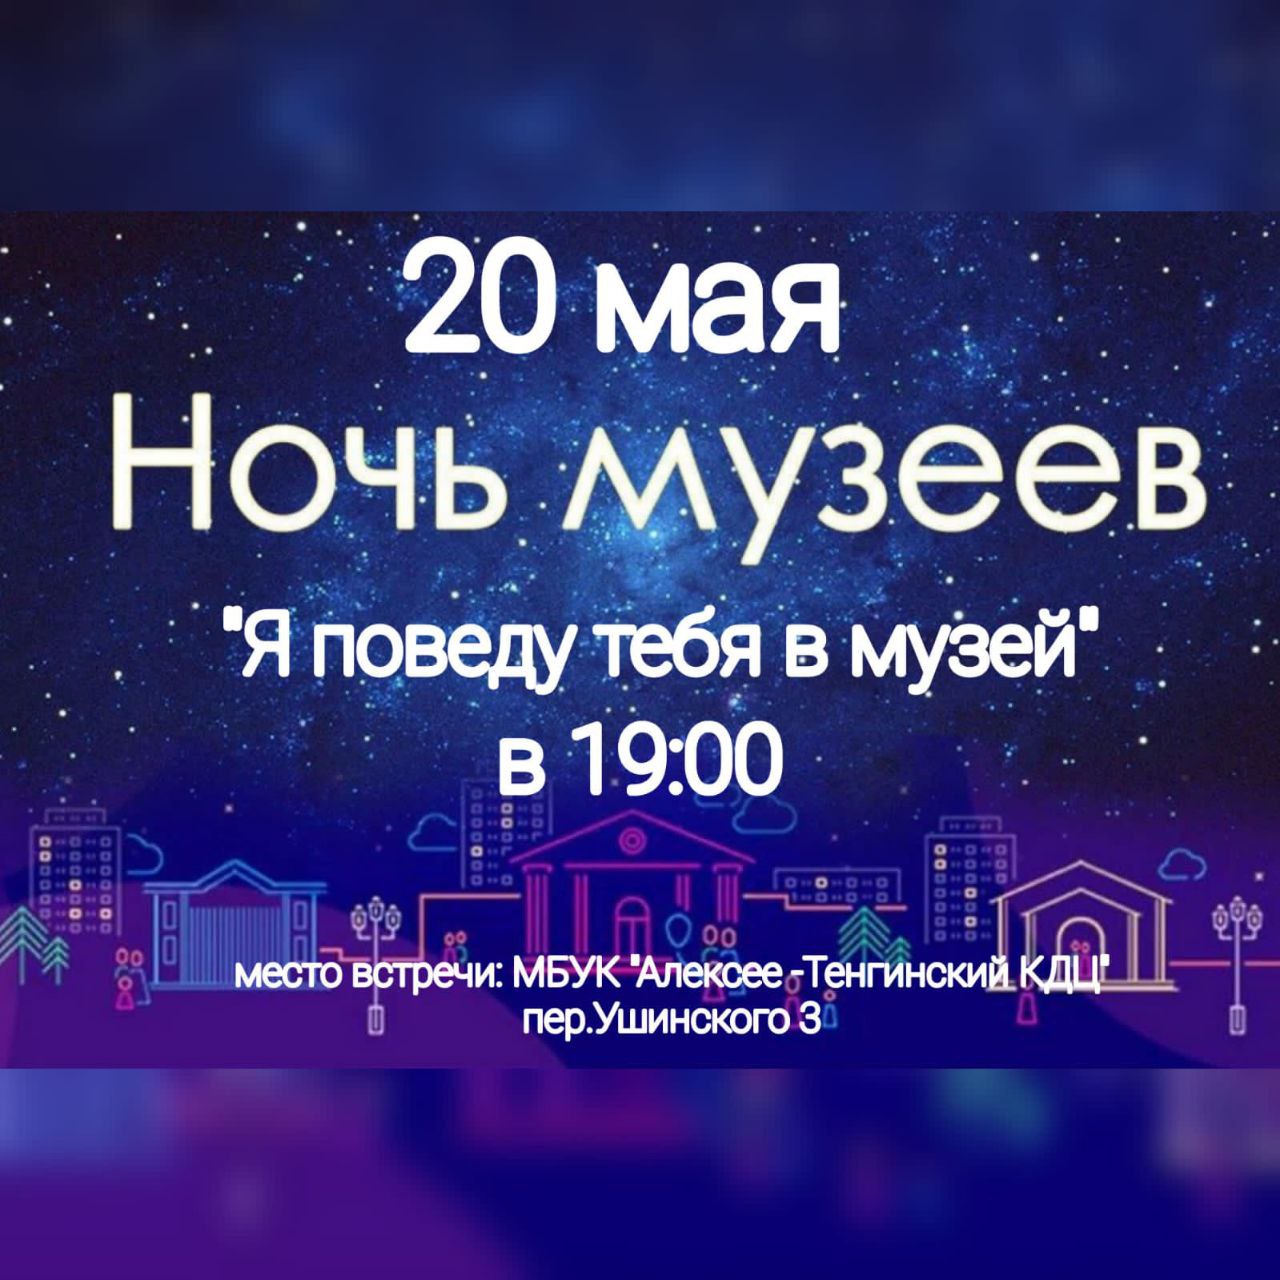 Read more about the article 20 мая «Ночь музеев»